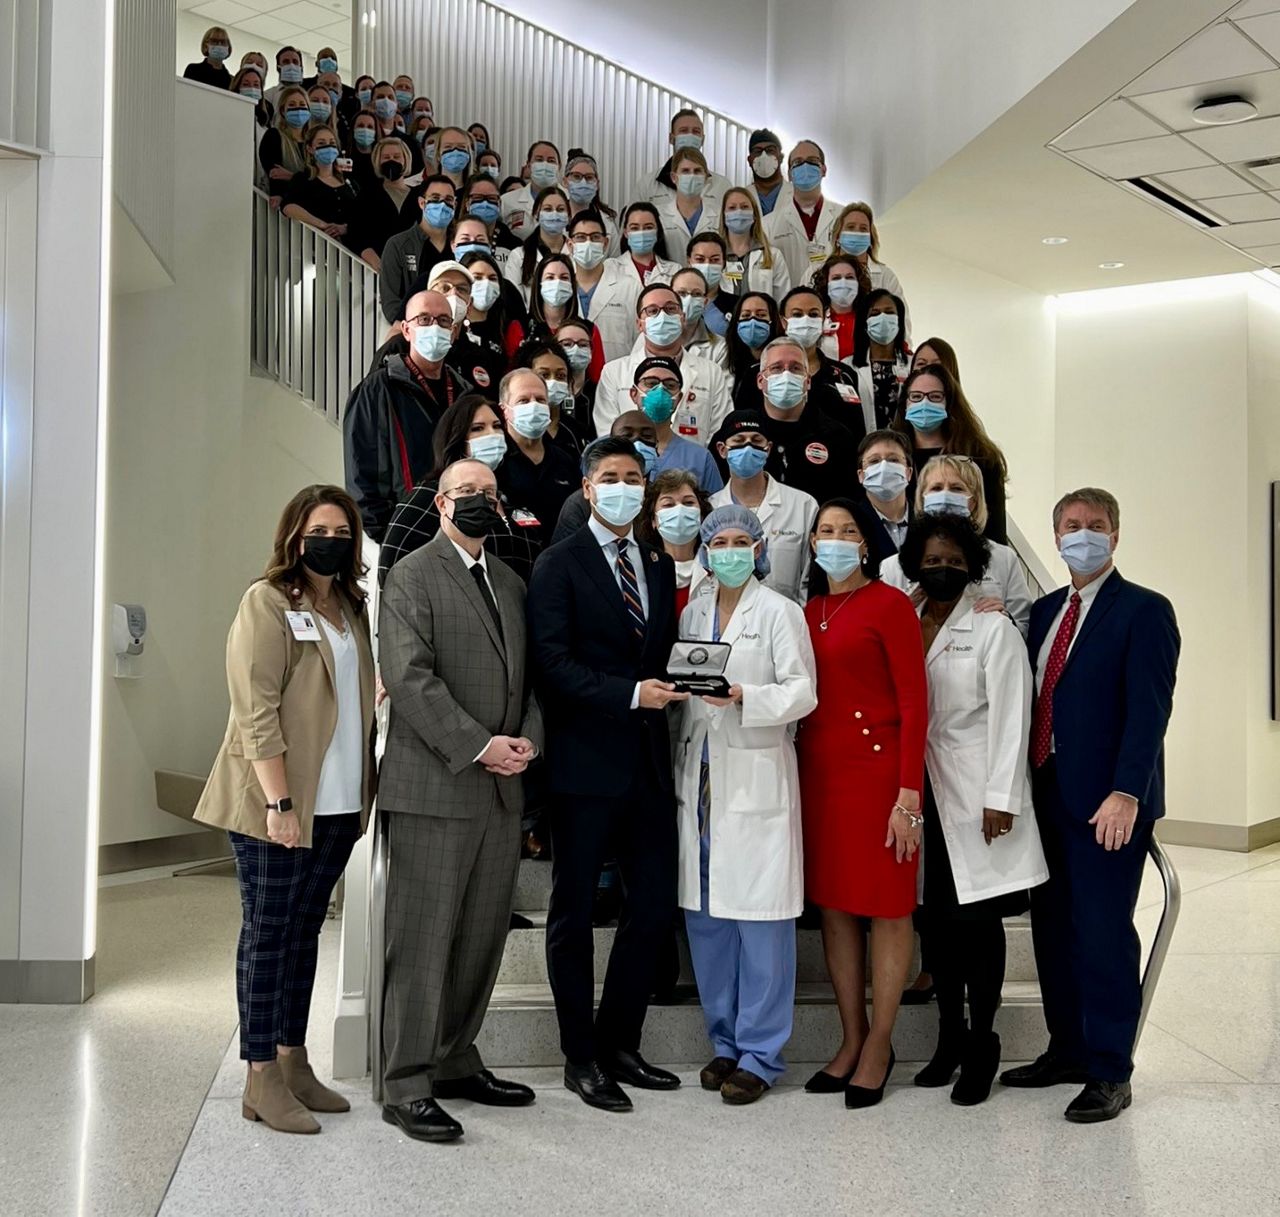 Mayor Pureval posed for a photo with hospital administrators and representatives of the various trauma care teams at UC Medical Center. (Casey Weldon/Spectrum News 1)